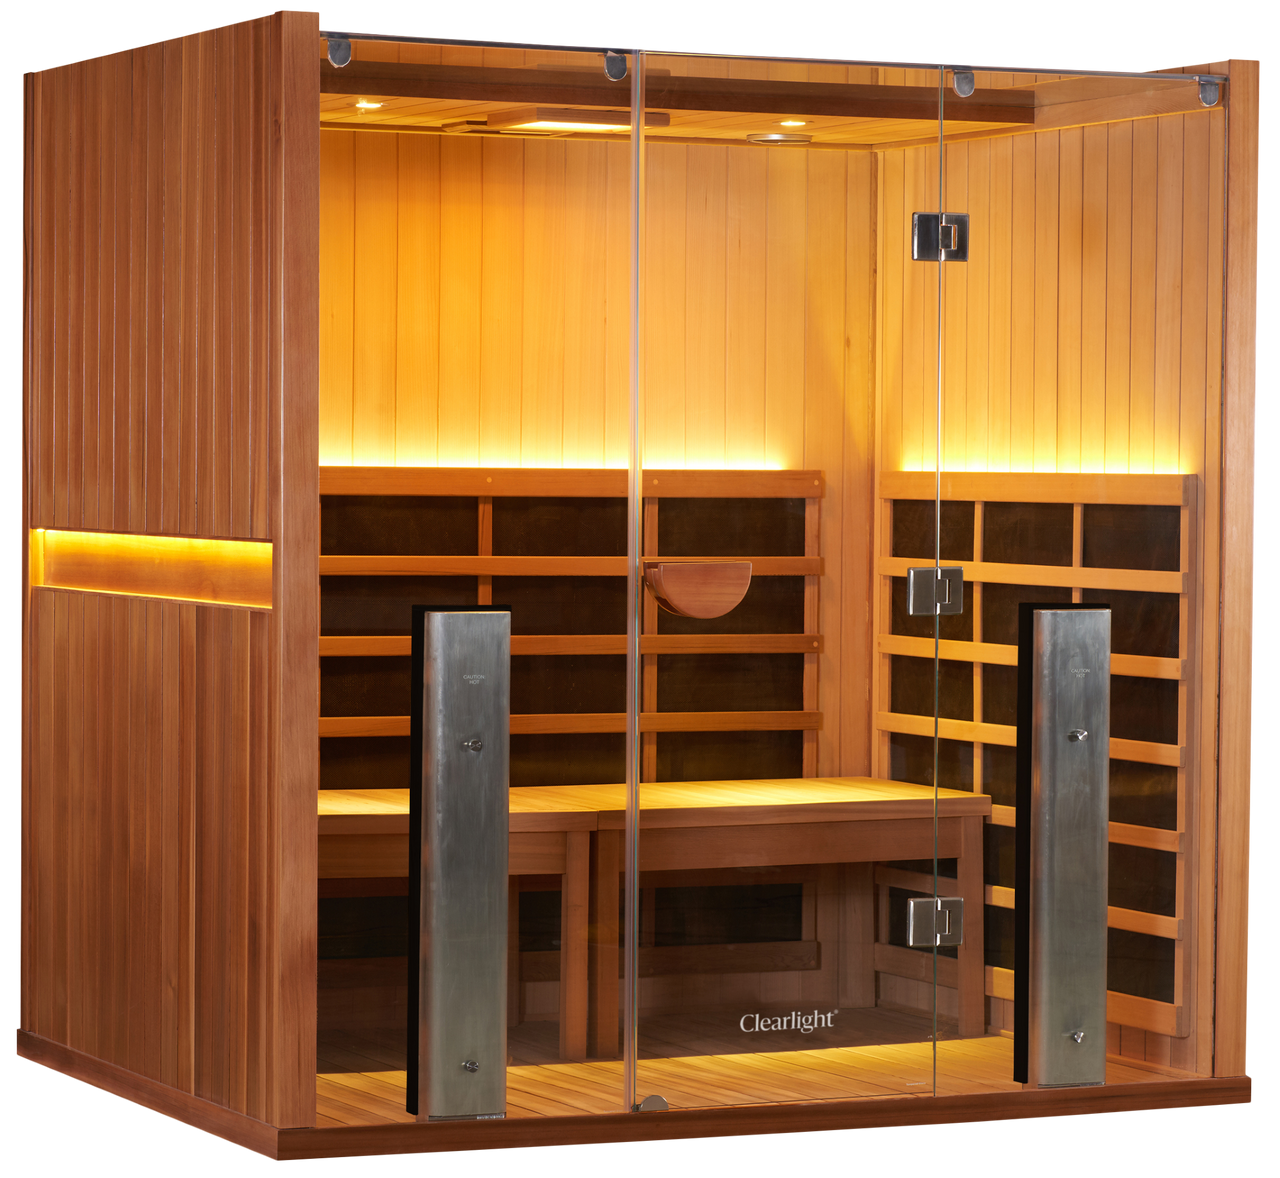 CLEARLIGHT SANCTUARY Y - Full Spectrum Four Person Infrared Sauna and Hot Yoga Room